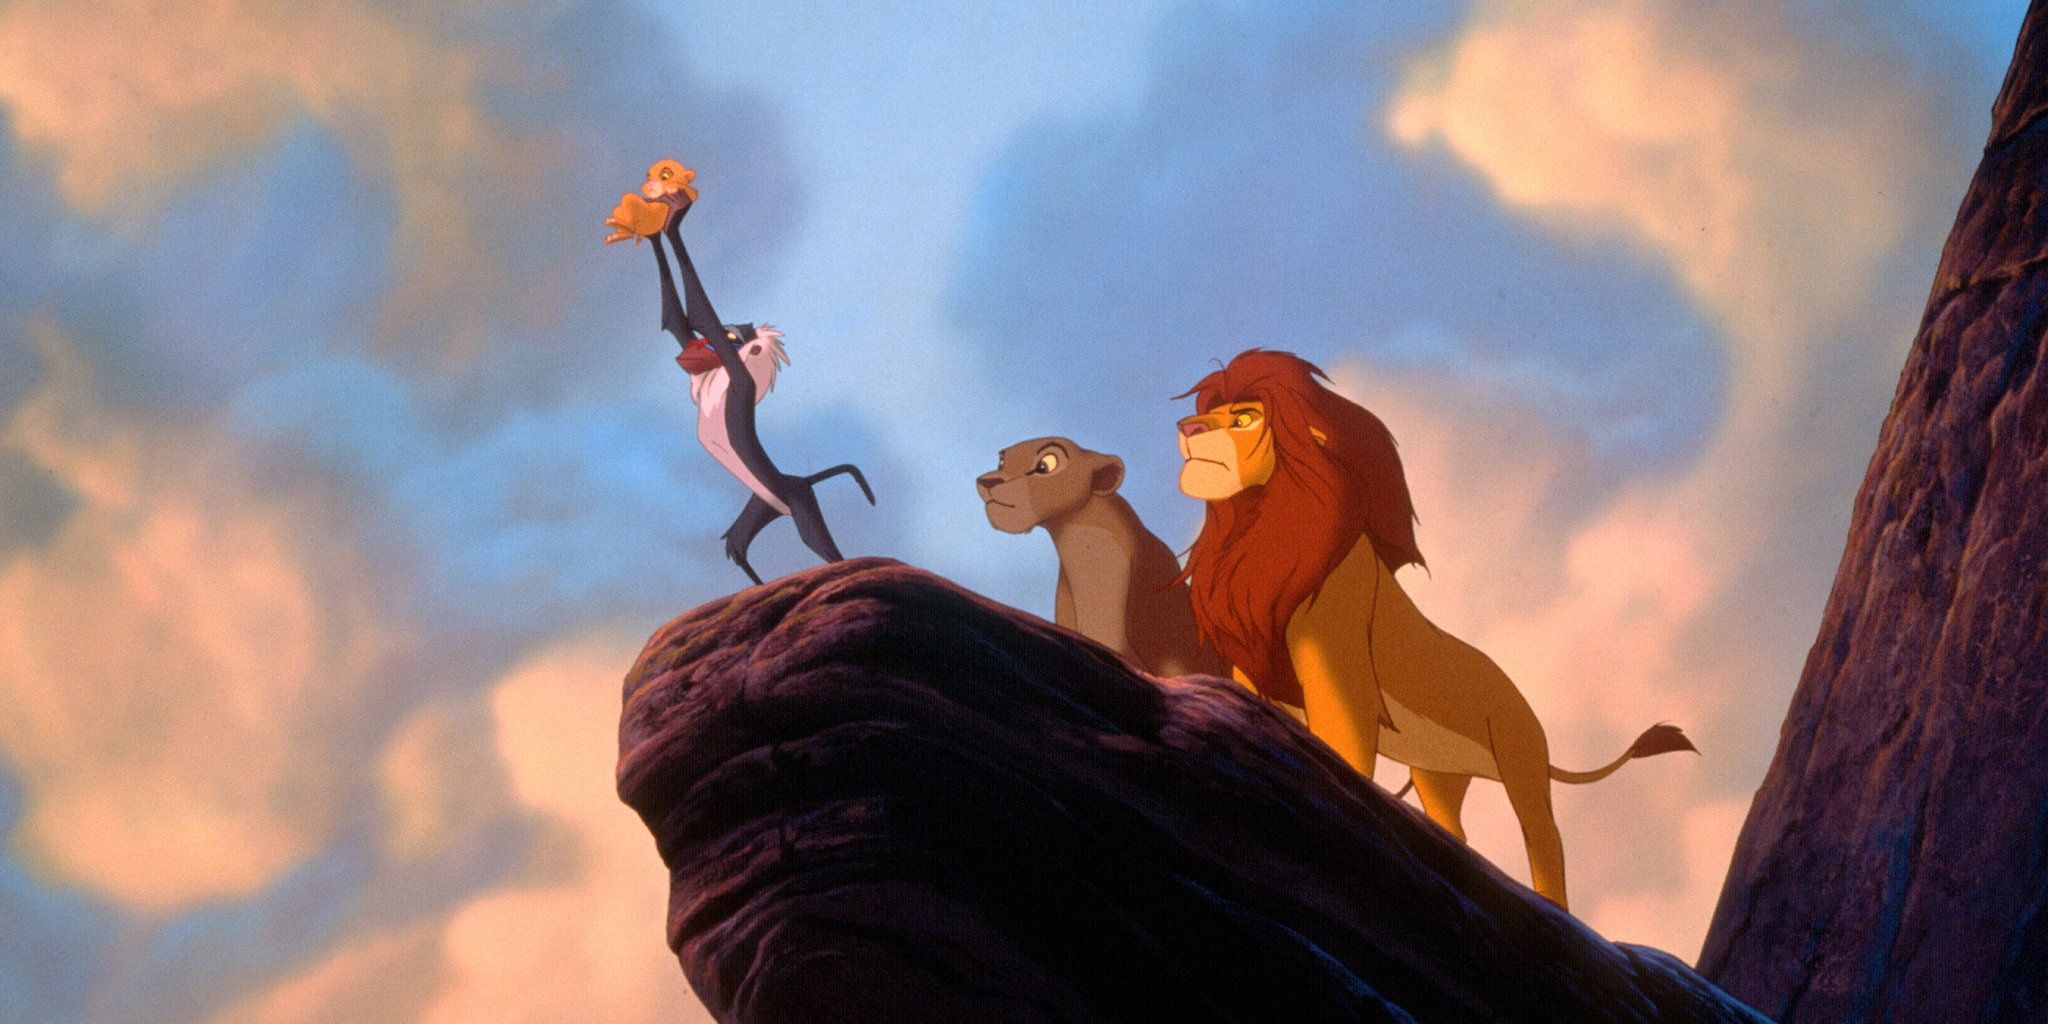 Rafiki presents Simba to the animals while atop Pride Rock with Mufasa and Sarabi looking on in The Lion King